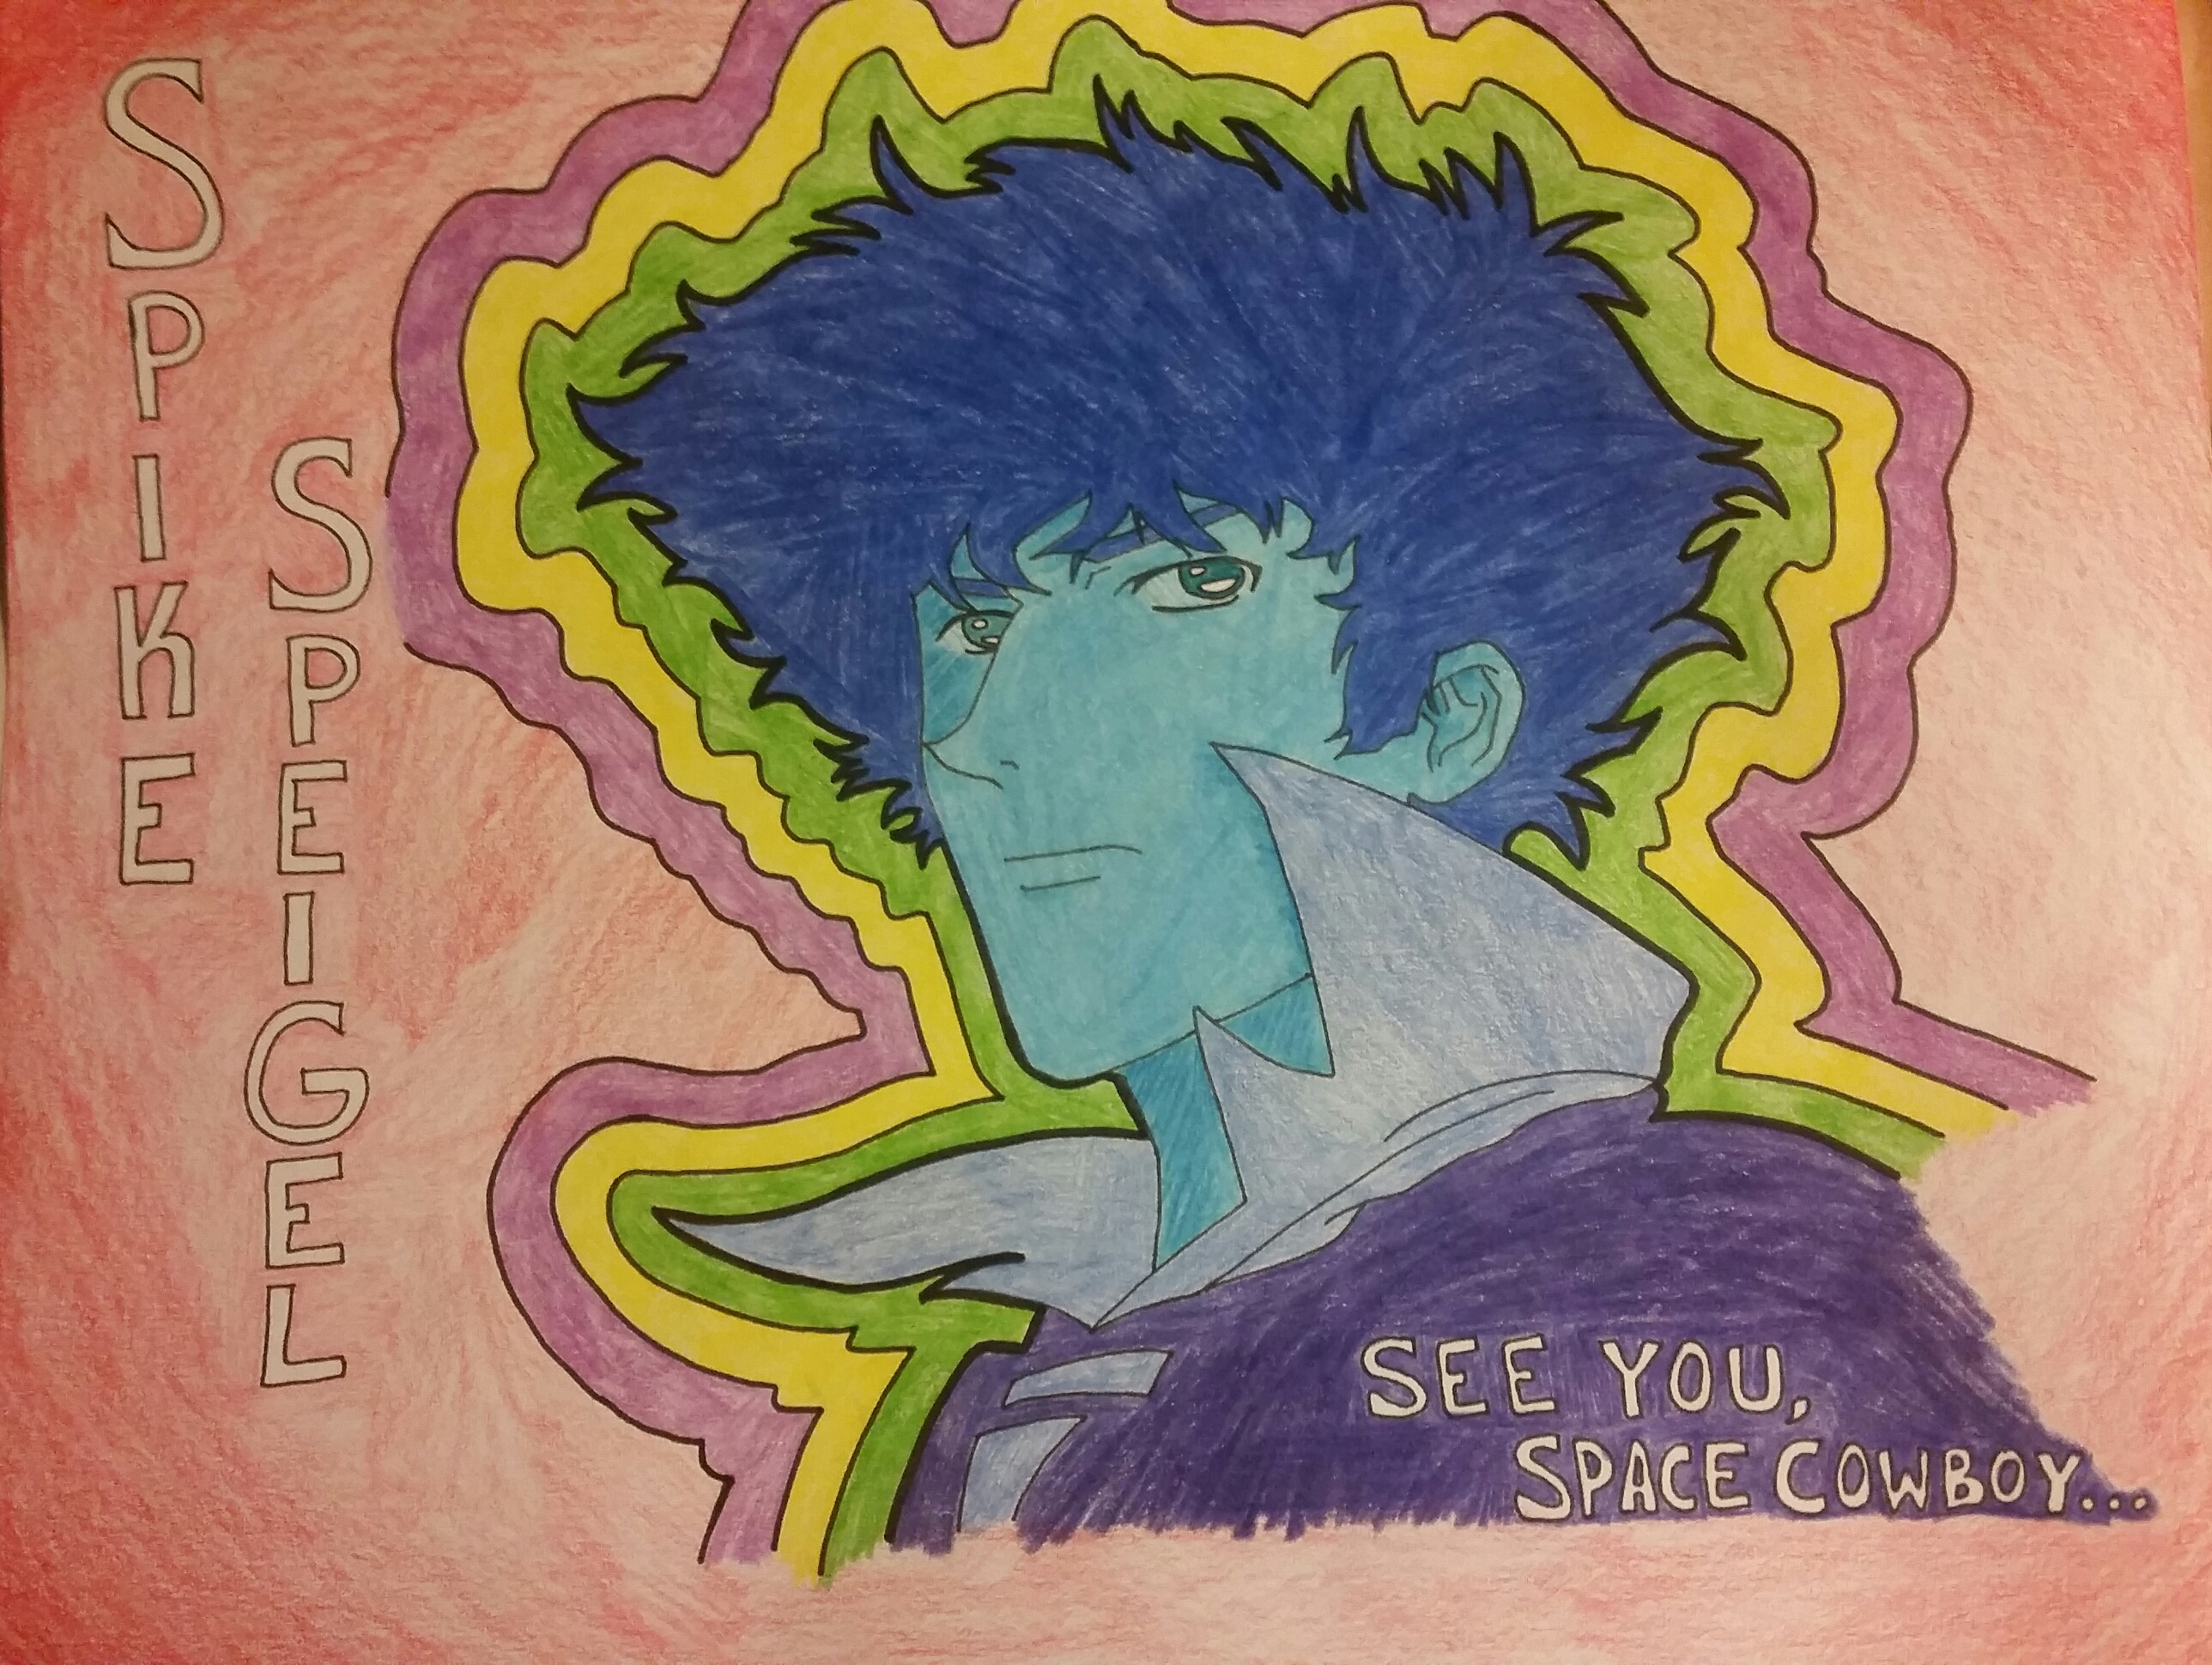 See You, Space Cowboy... by SacredWolf